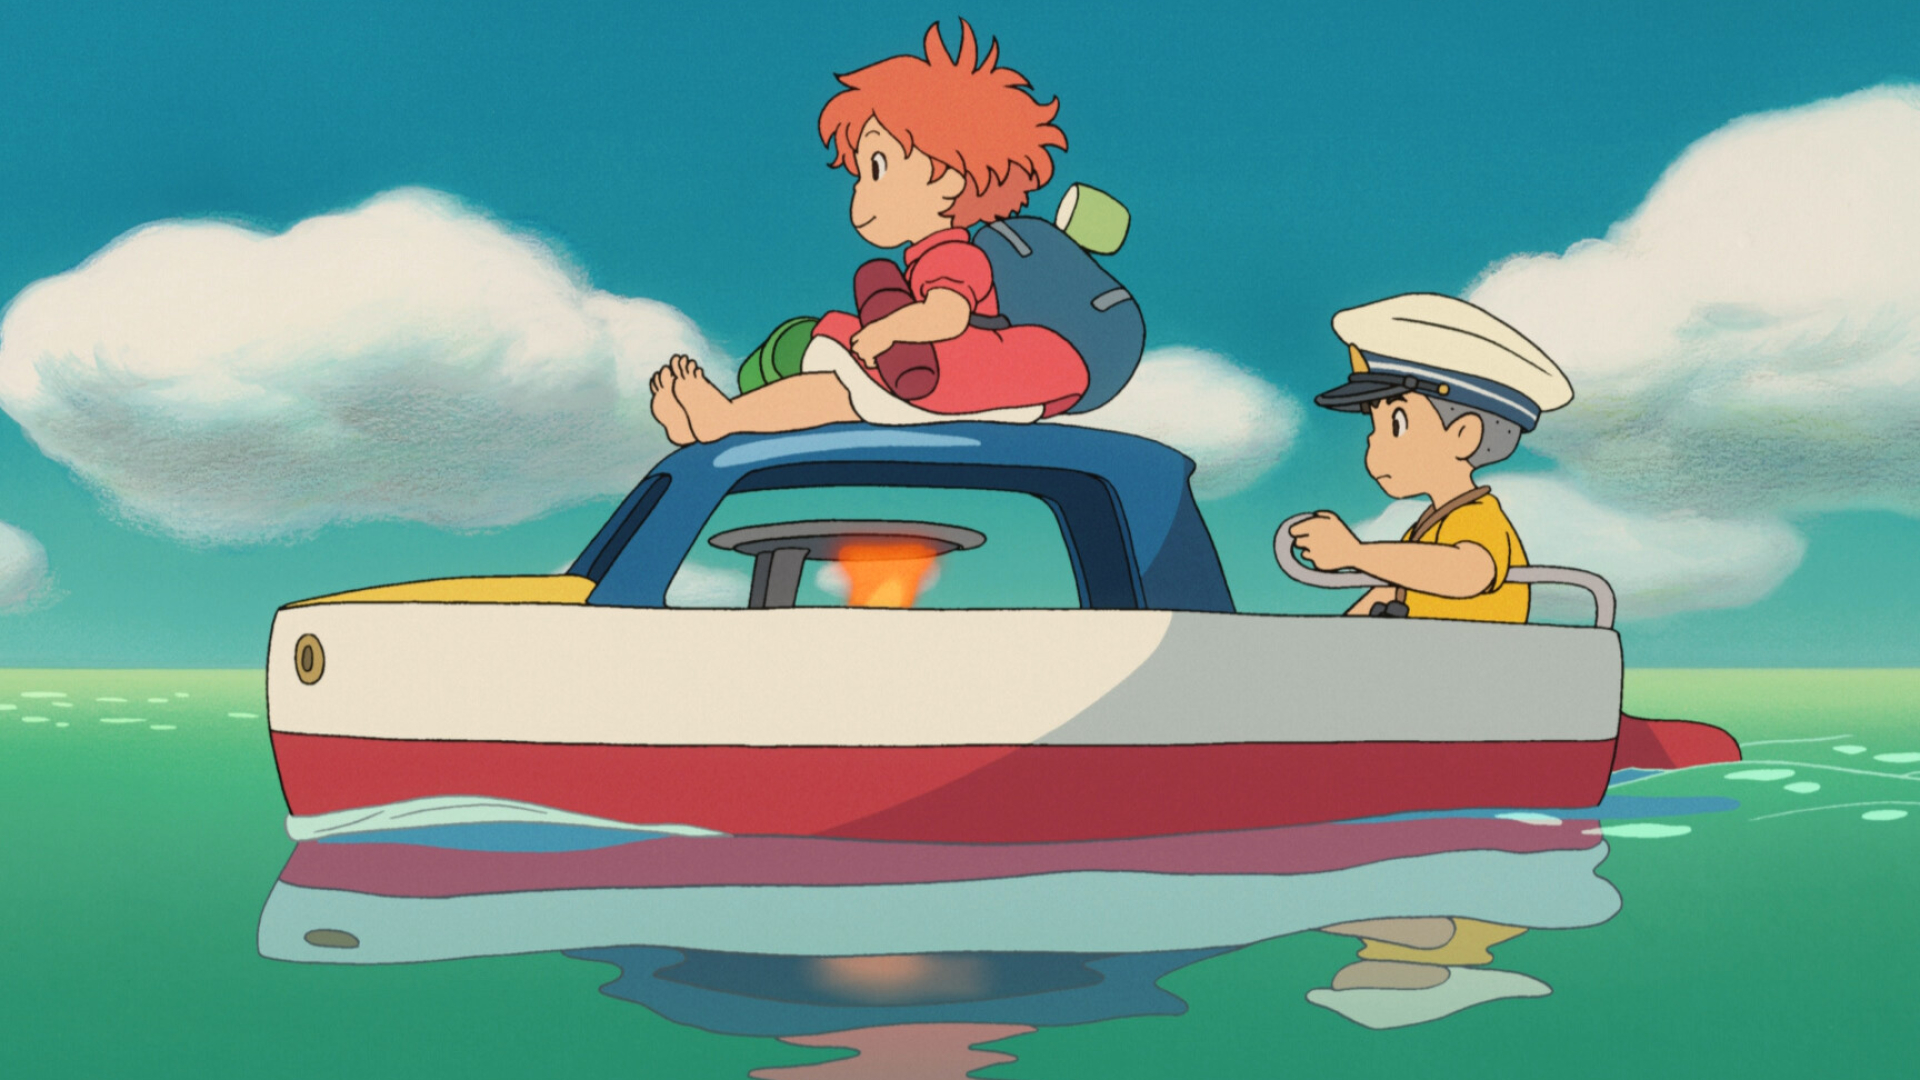 Ponyo: The story of a fish transformed by her love for a five-year-old human boy, Sosuke. 1920x1080 Full HD Wallpaper.